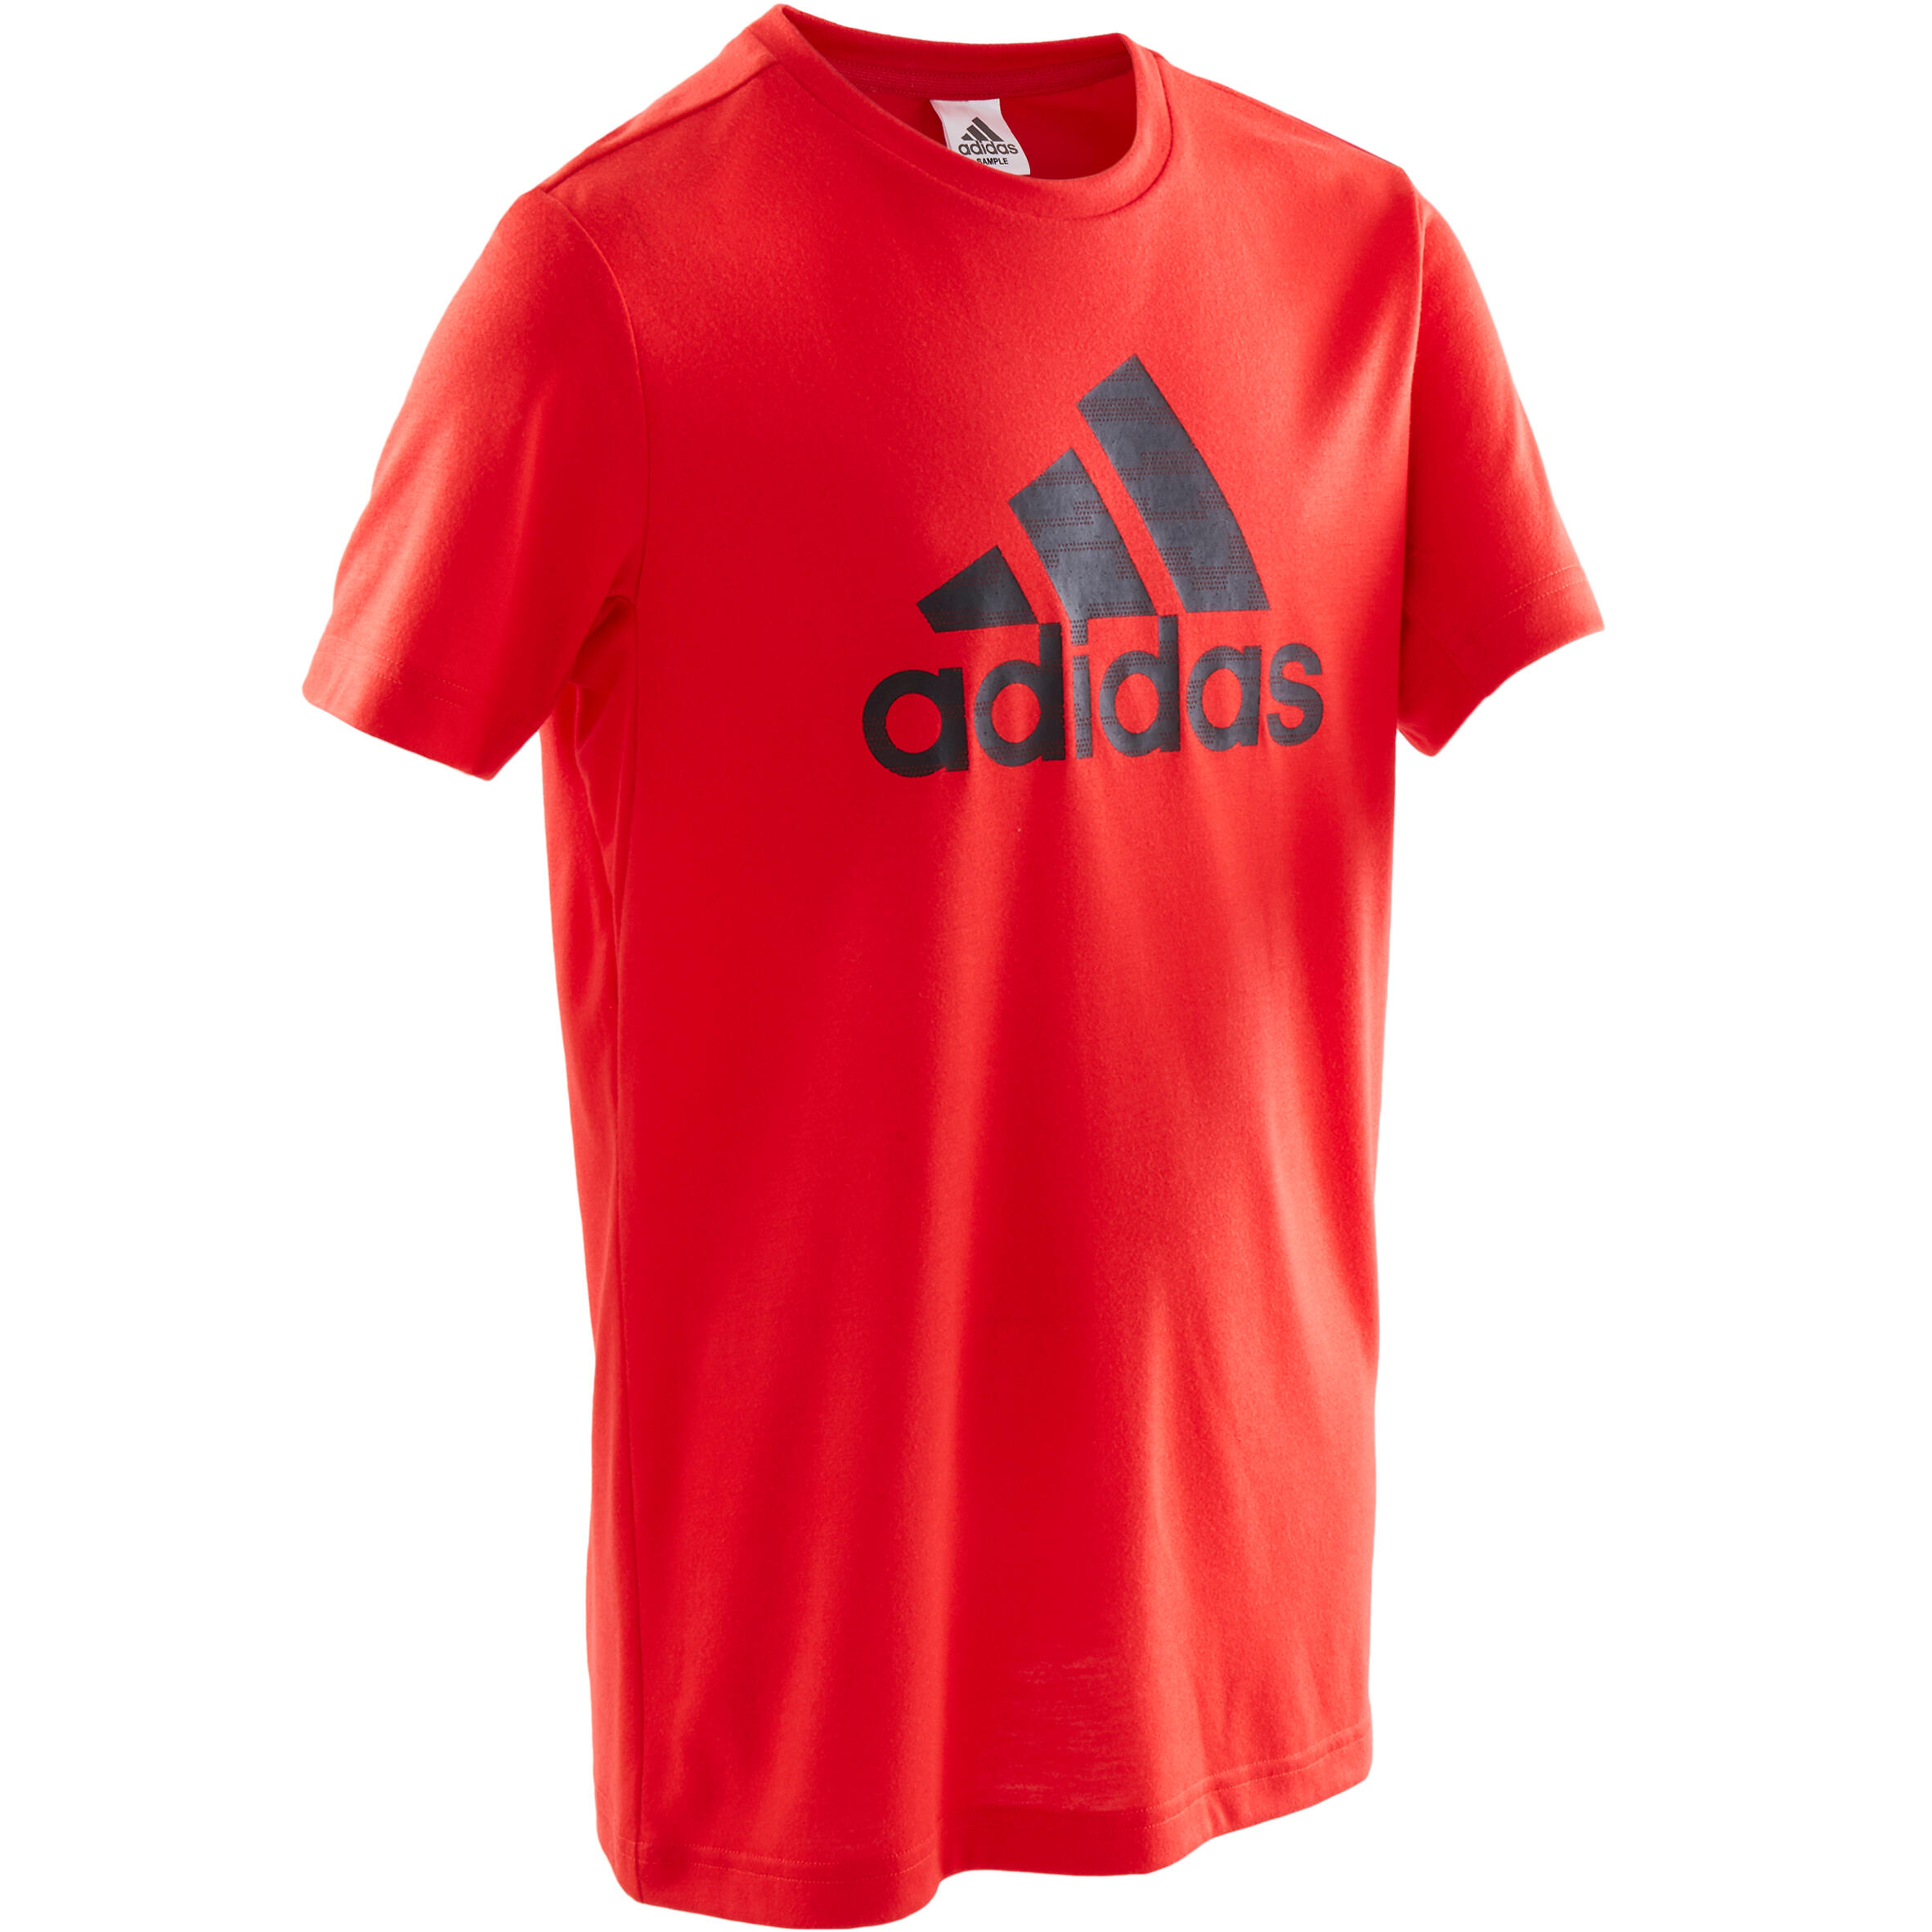 adidas shirts for toddlers